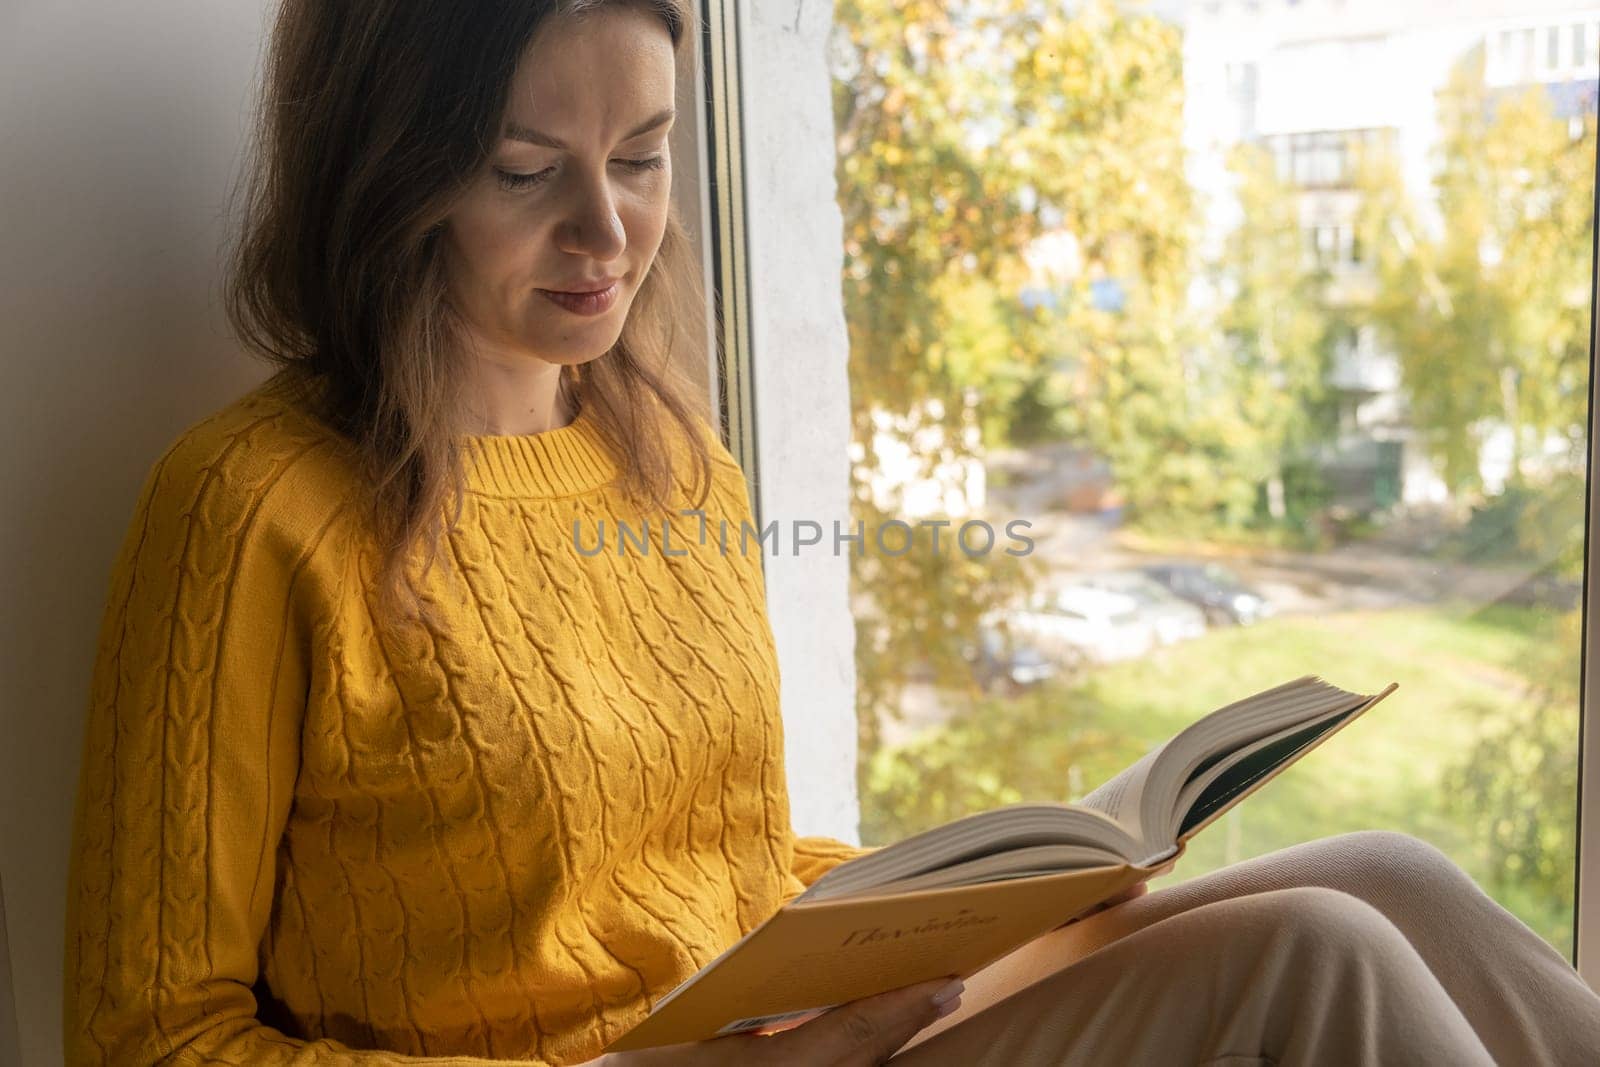 Young beautiful woman sitting by the window yellow knitted sweater read book, daily planner, notepad. Relax concept. Hold cappuccino glass of coffee with white foam. Text is out of focus